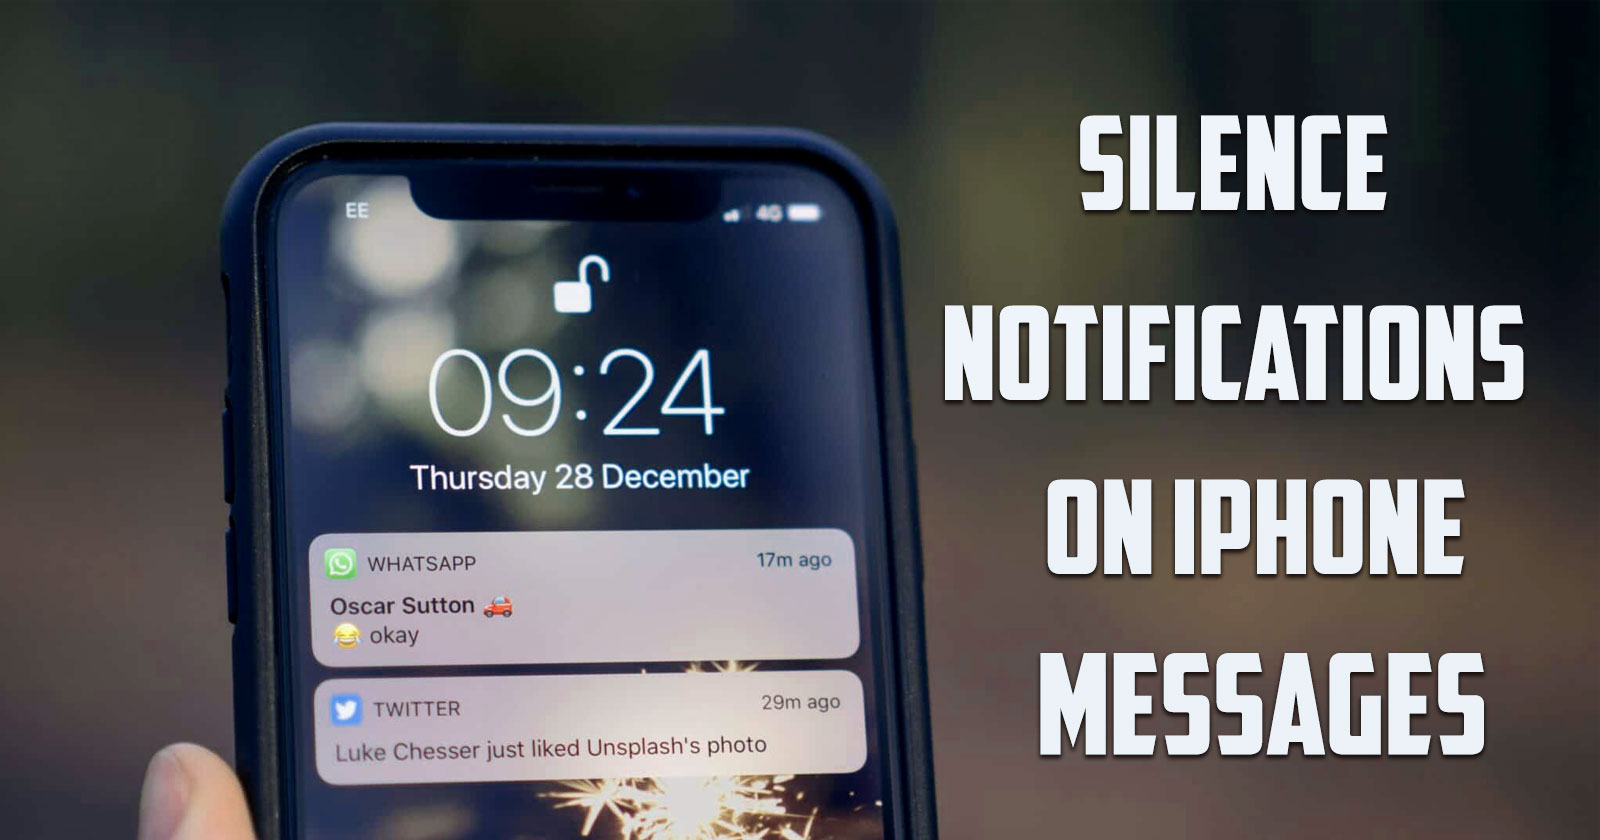 How to Silence Notifications on iPhone Messages